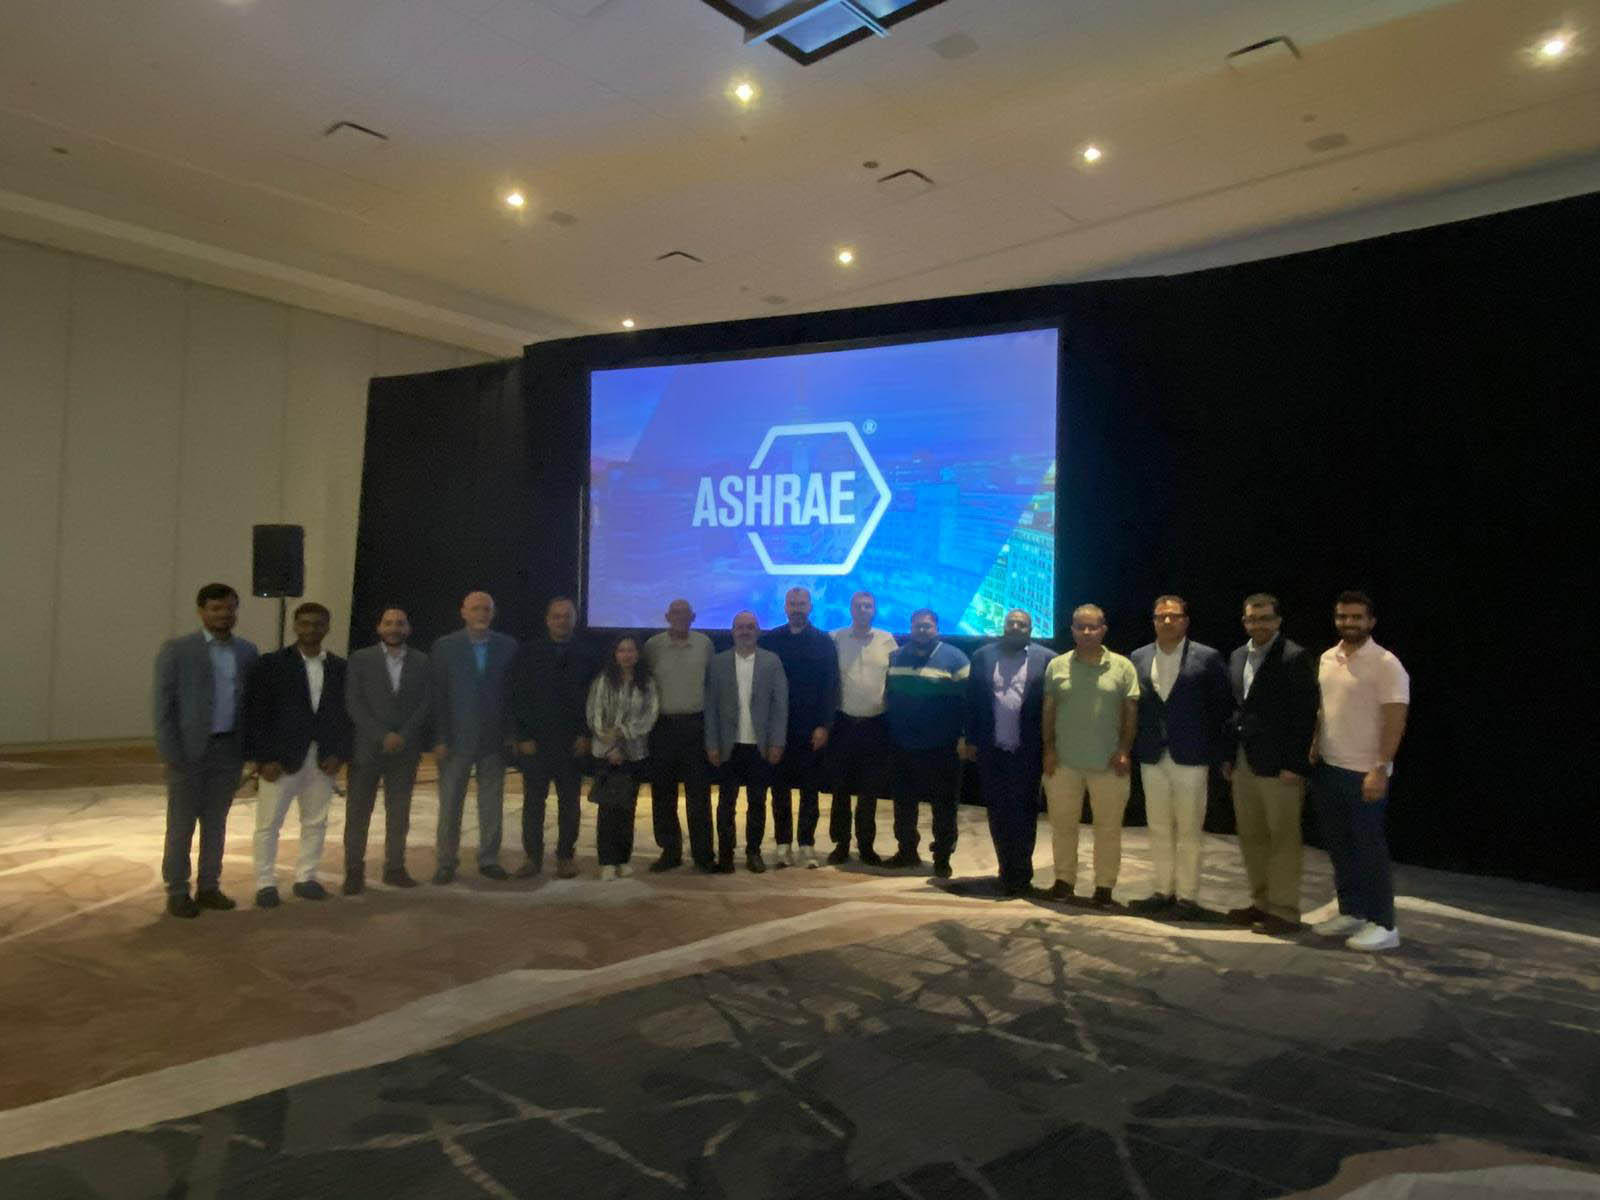 We represented Türkiye at the Ashrae summer conference held in the USA